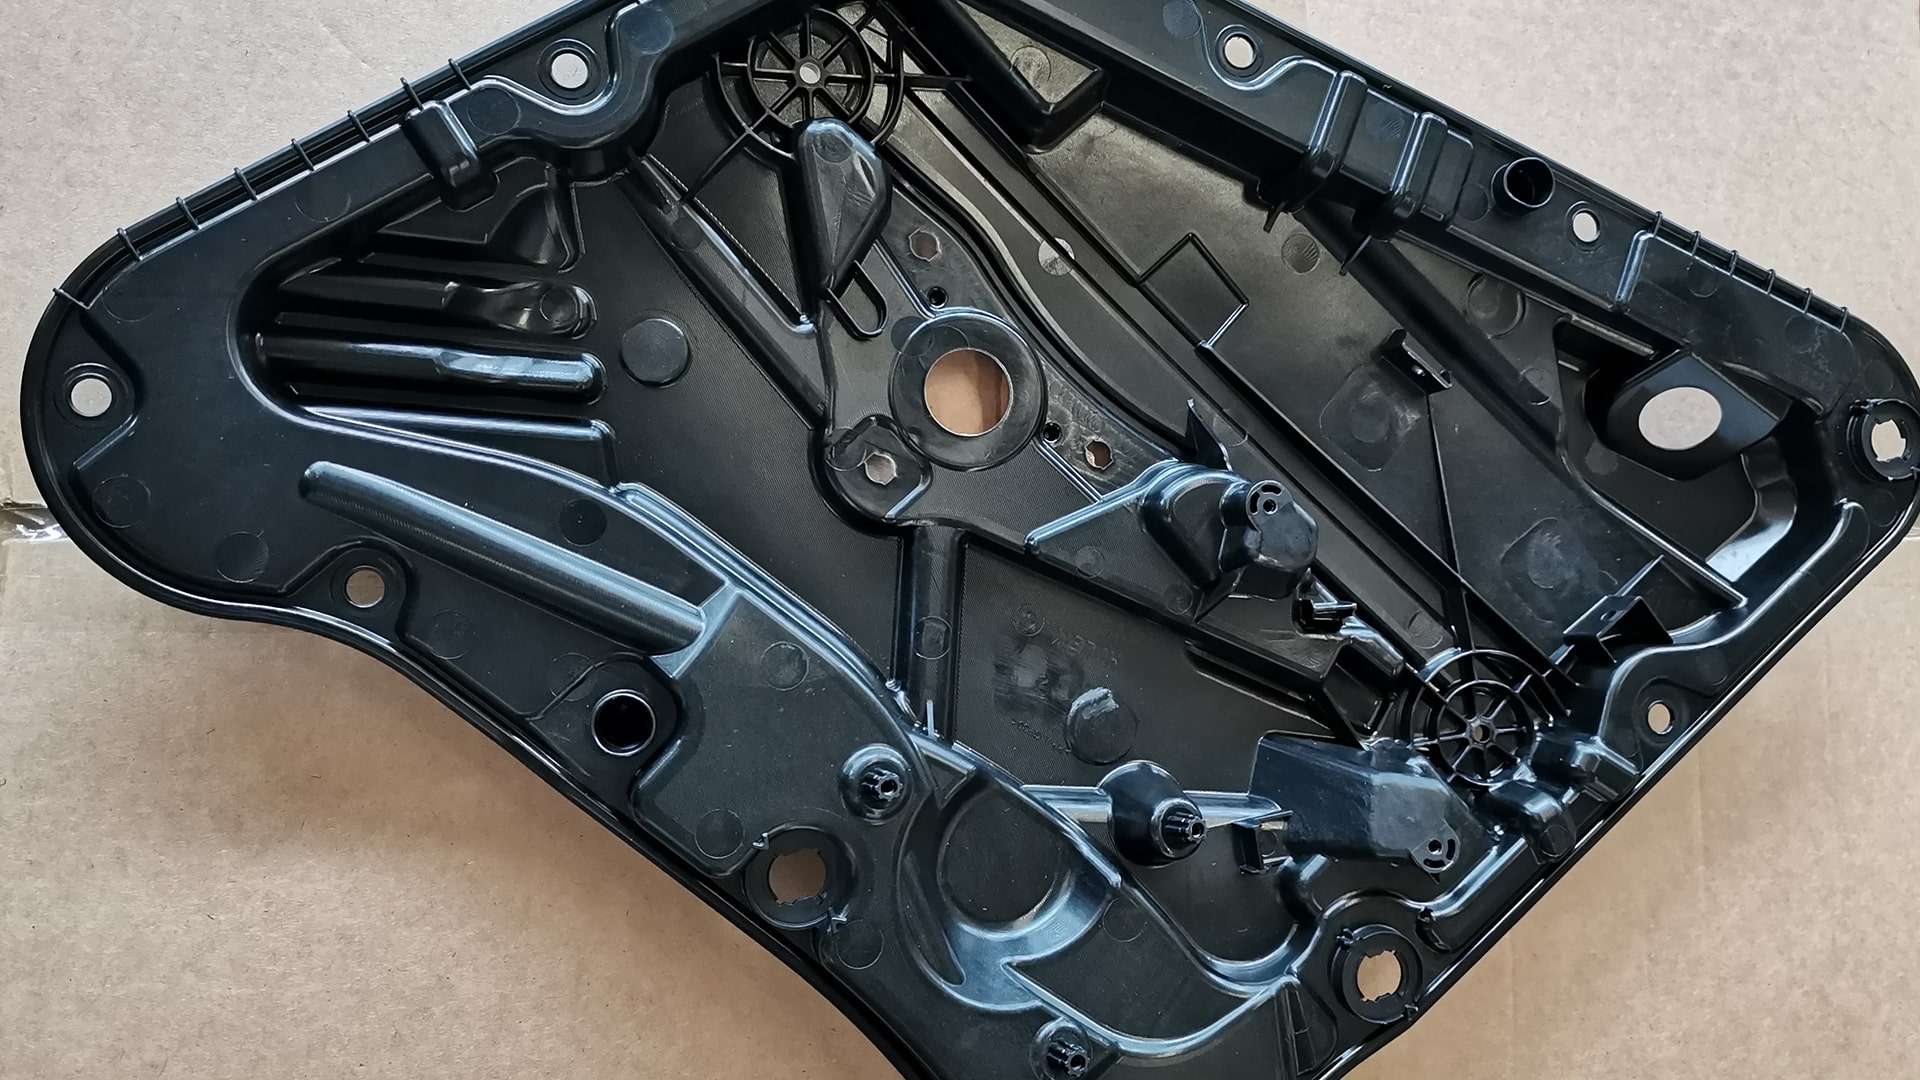  Expertly engineered automotive moulds are essential for the production of high quality, uniform auto parts. As a leading moulds supplier in China, our supplies automotive molds to several major auto… READ MORE